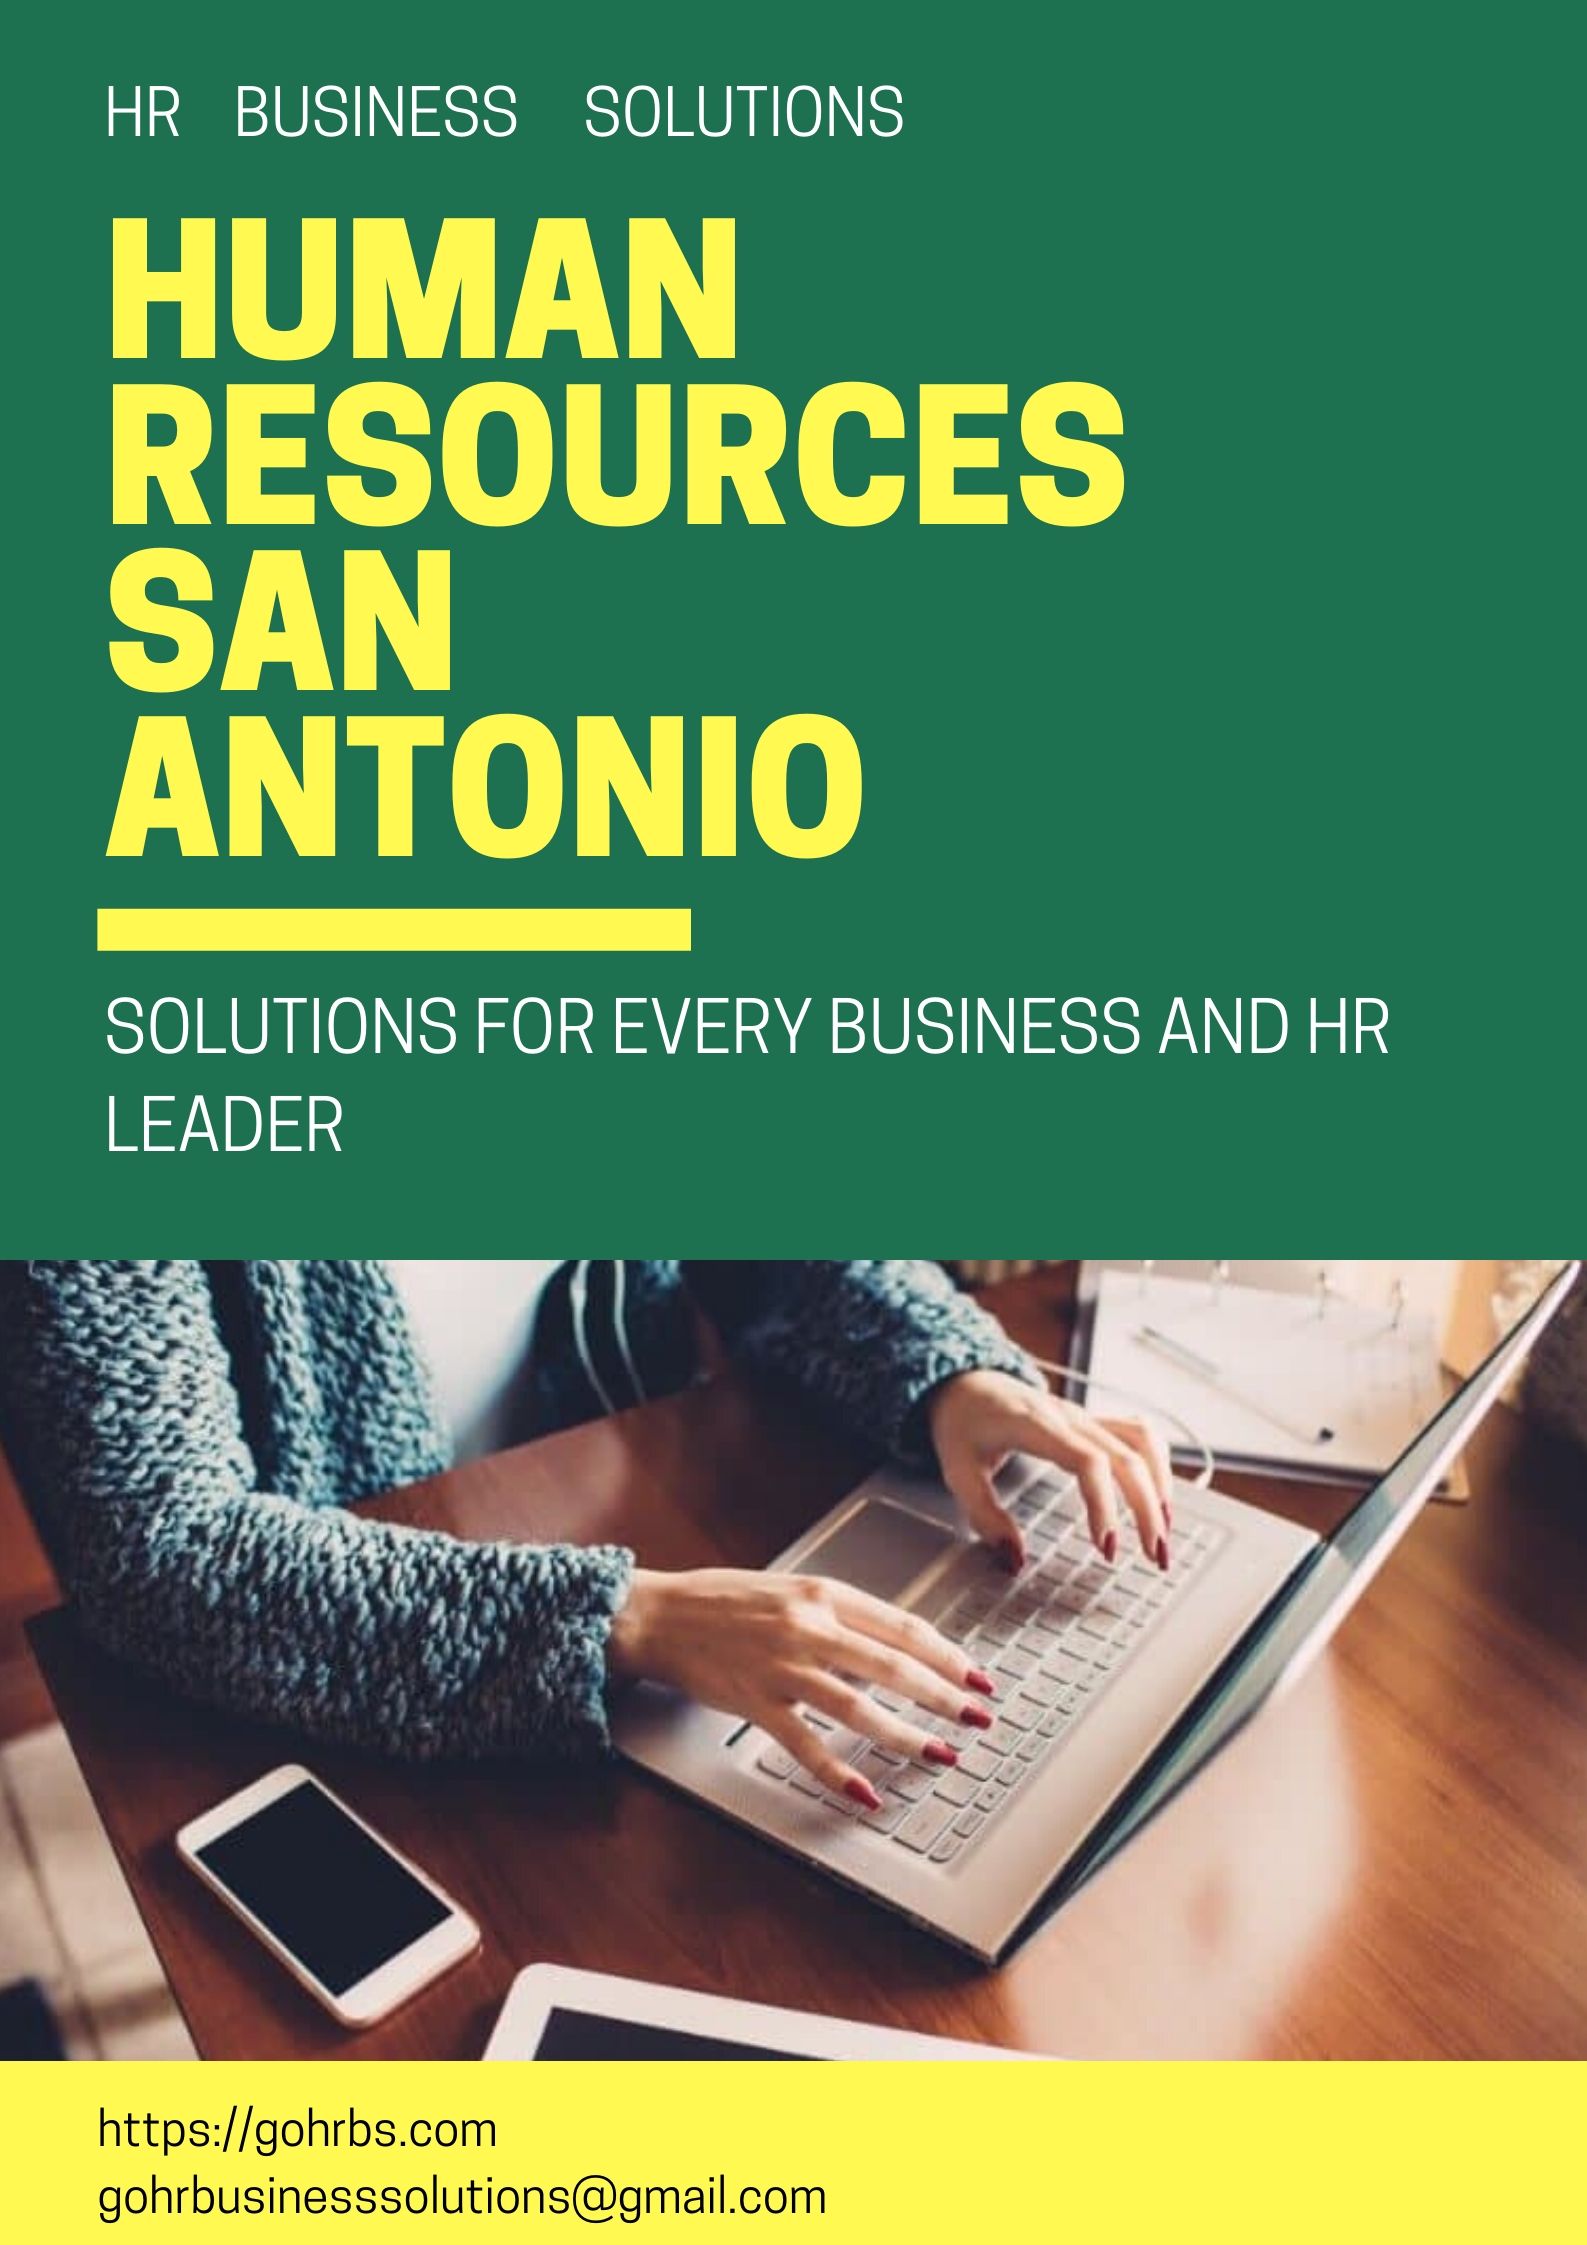 Human Resources San Antonio - Human Resources Business Solutions.jpg  by gohrbusinesssolutions